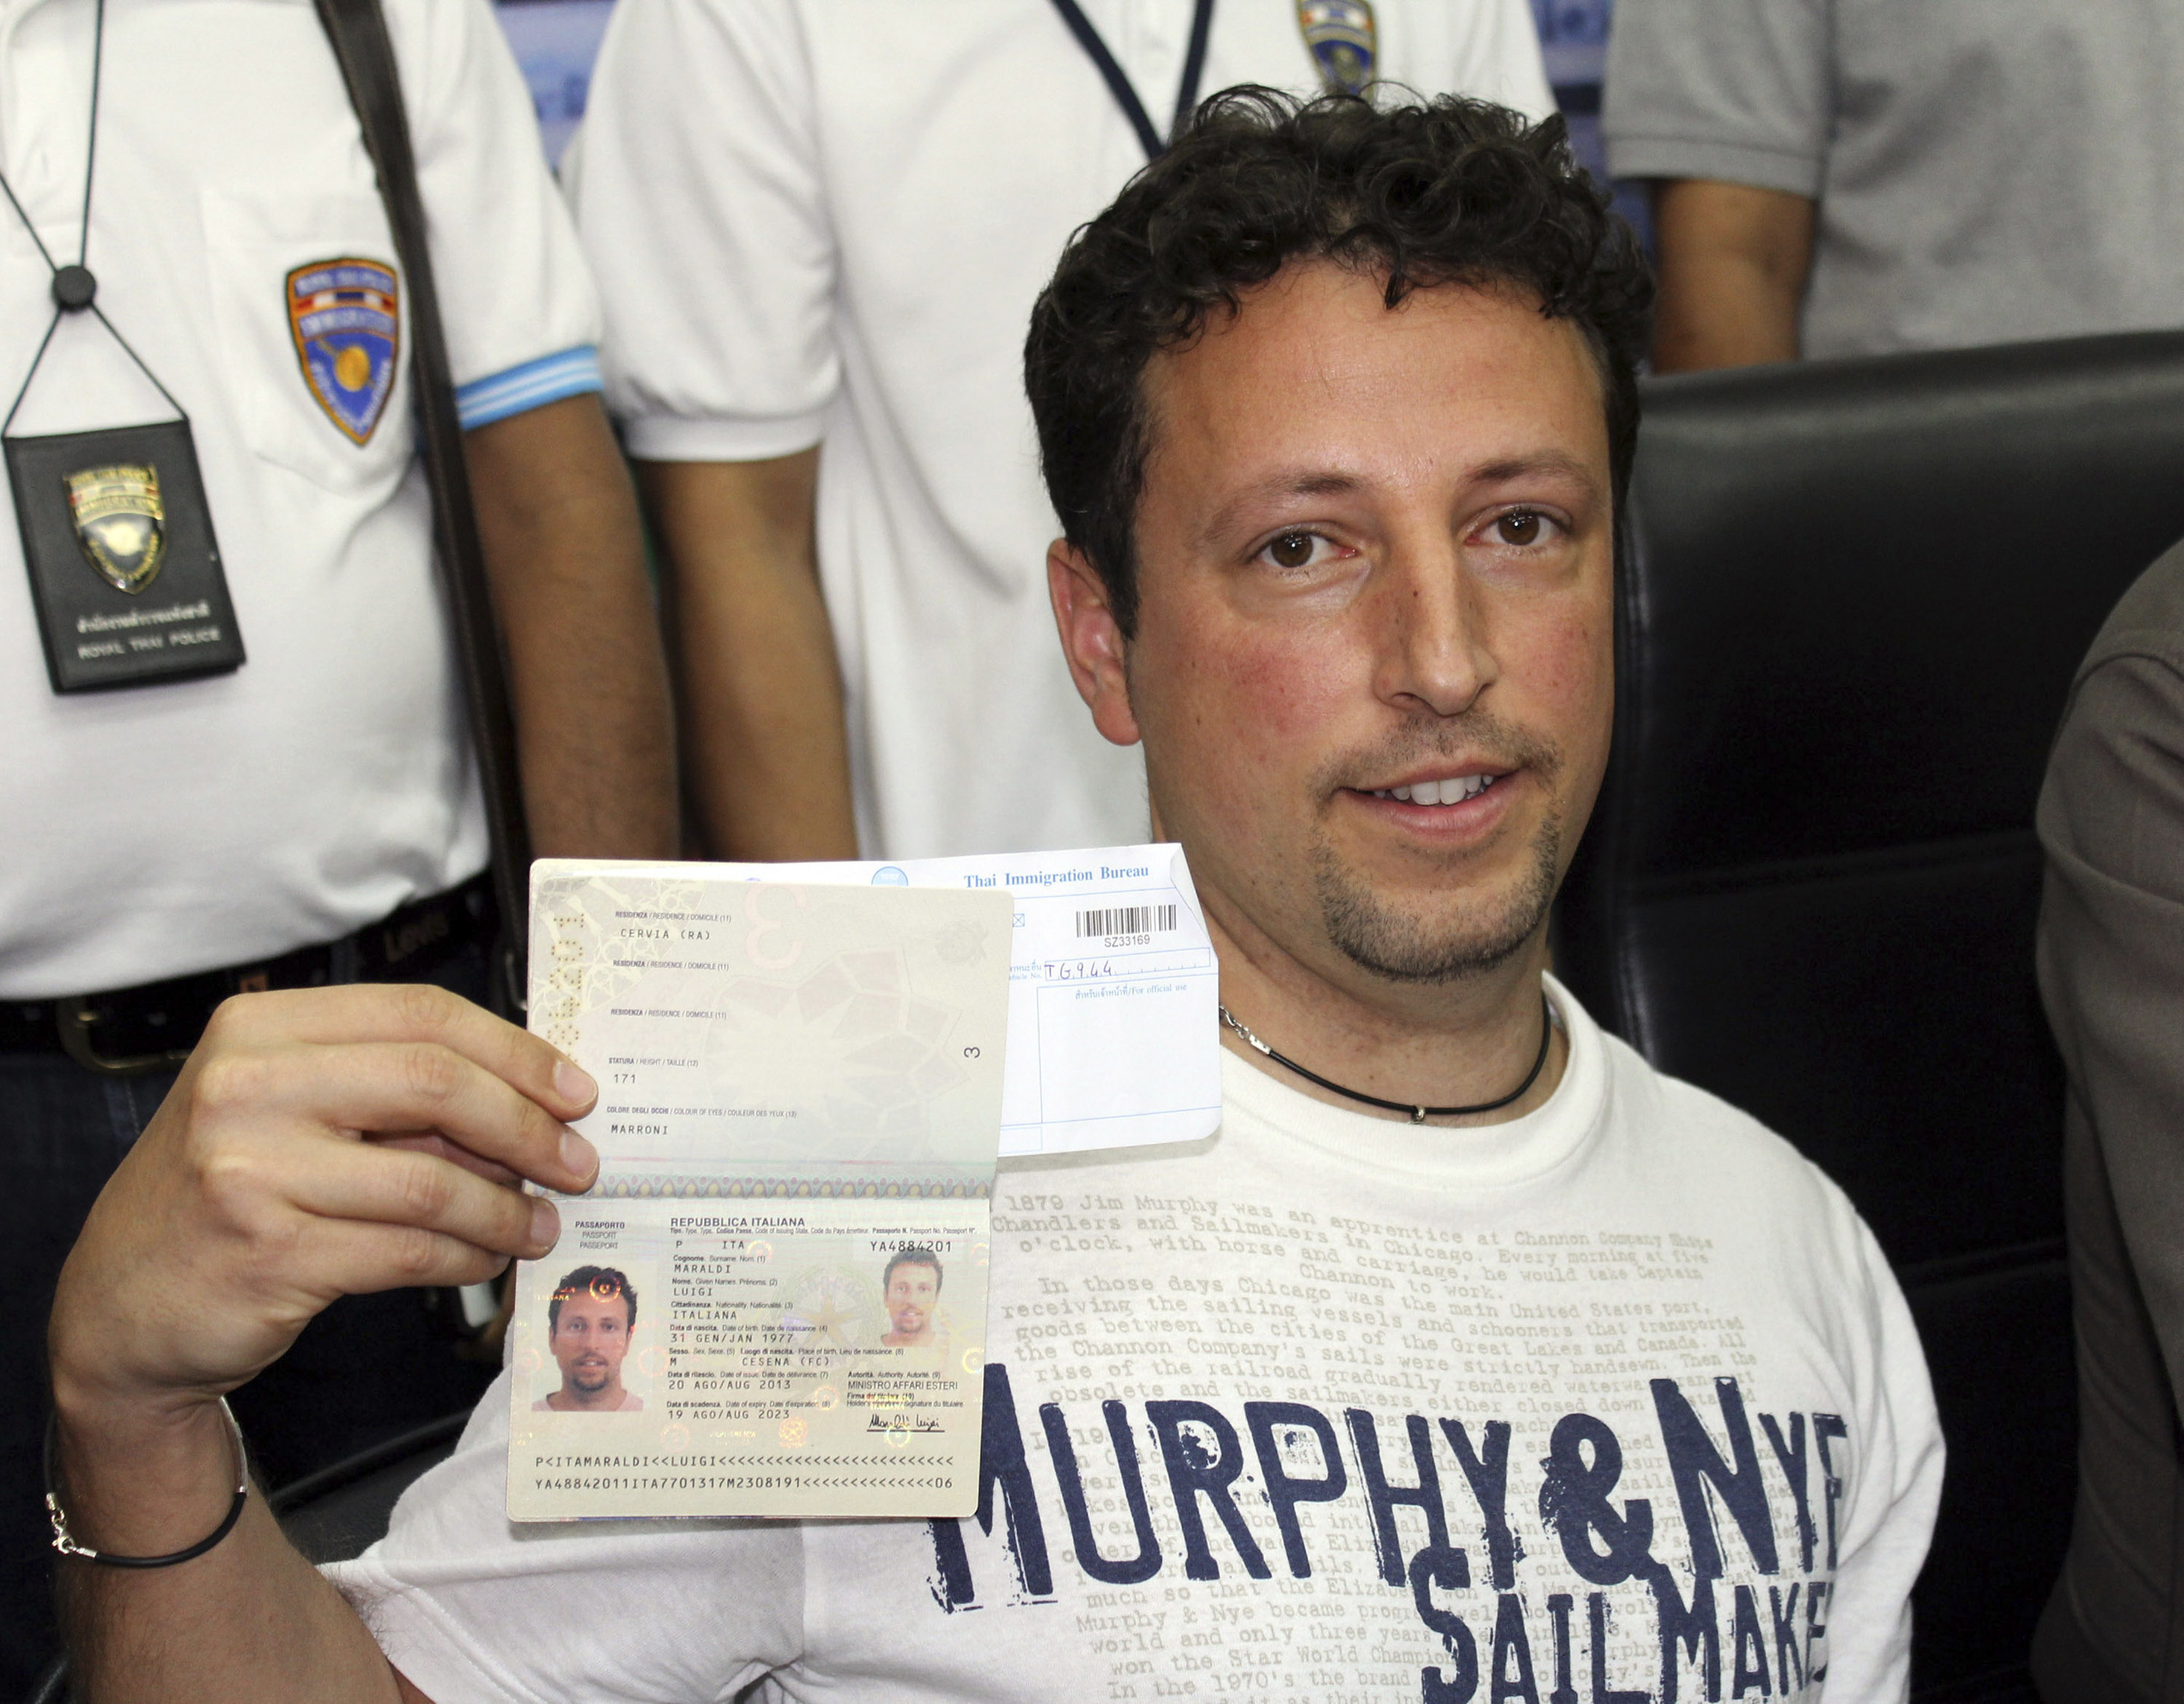 Italian Luigi Maraldi, whose stolen passport was used by a passenger boarding the missing Malaysia airlines flight 370, shows his passport as he reports himself to Thai police at Phuket police station in Thailand. Photo: AP